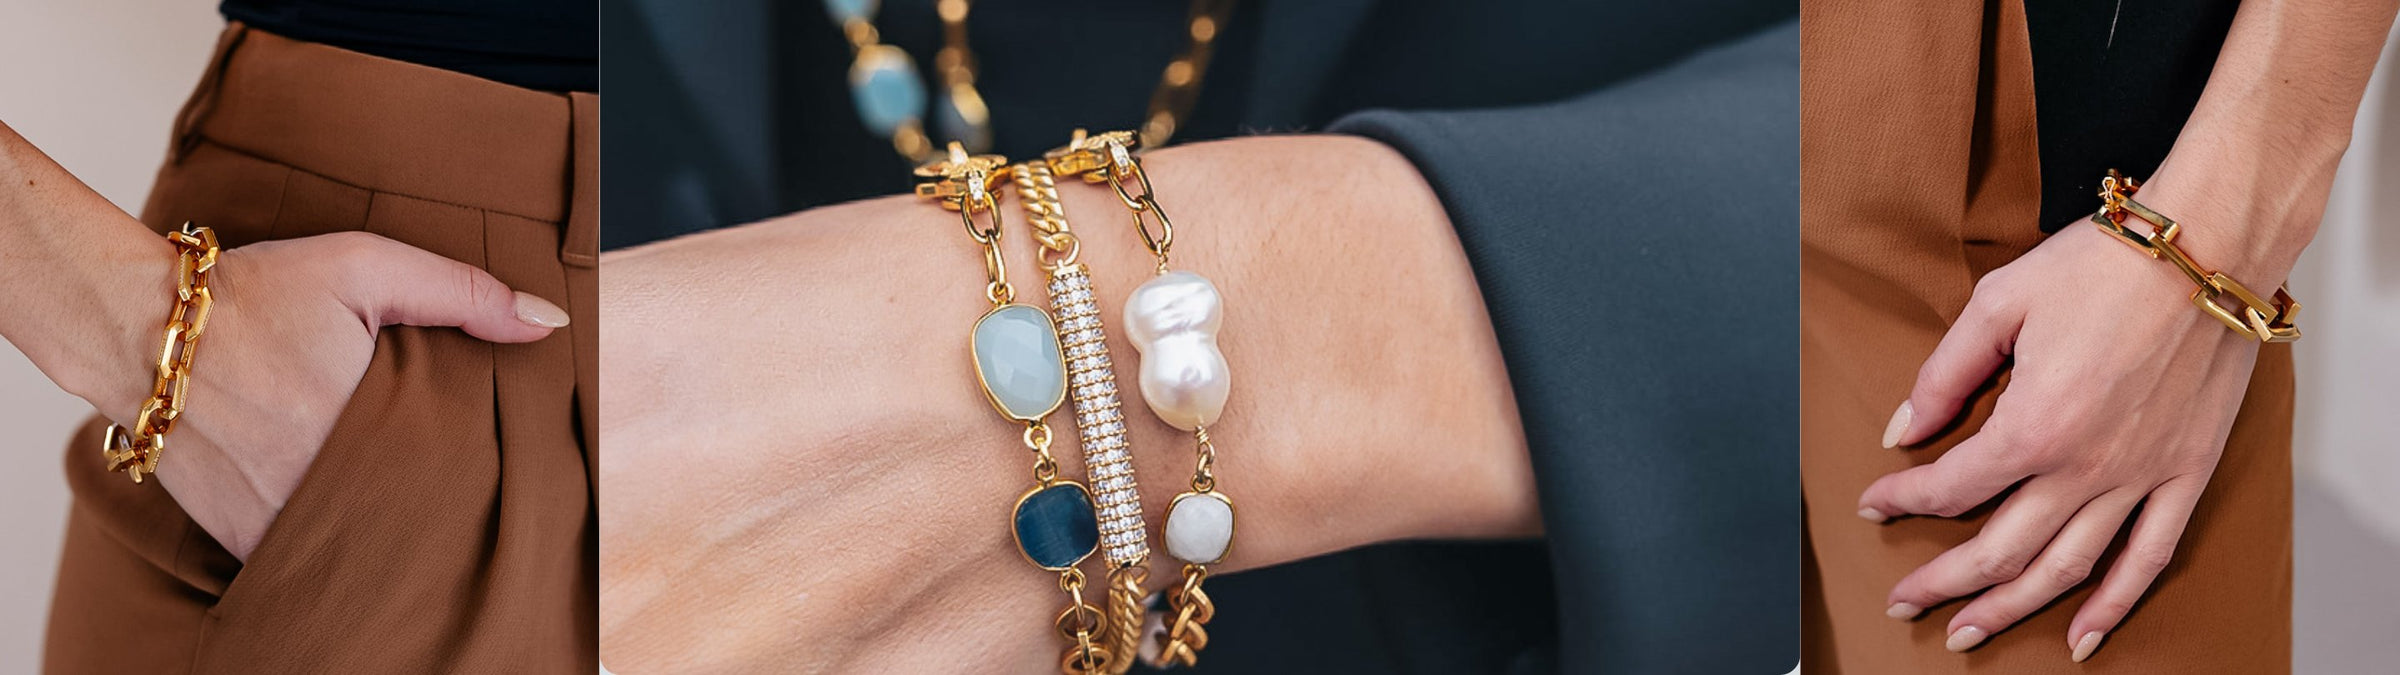 Header image showcasing an assortment of Statement Bracelets by Loni Paul, worn by women expressing their unique styles.